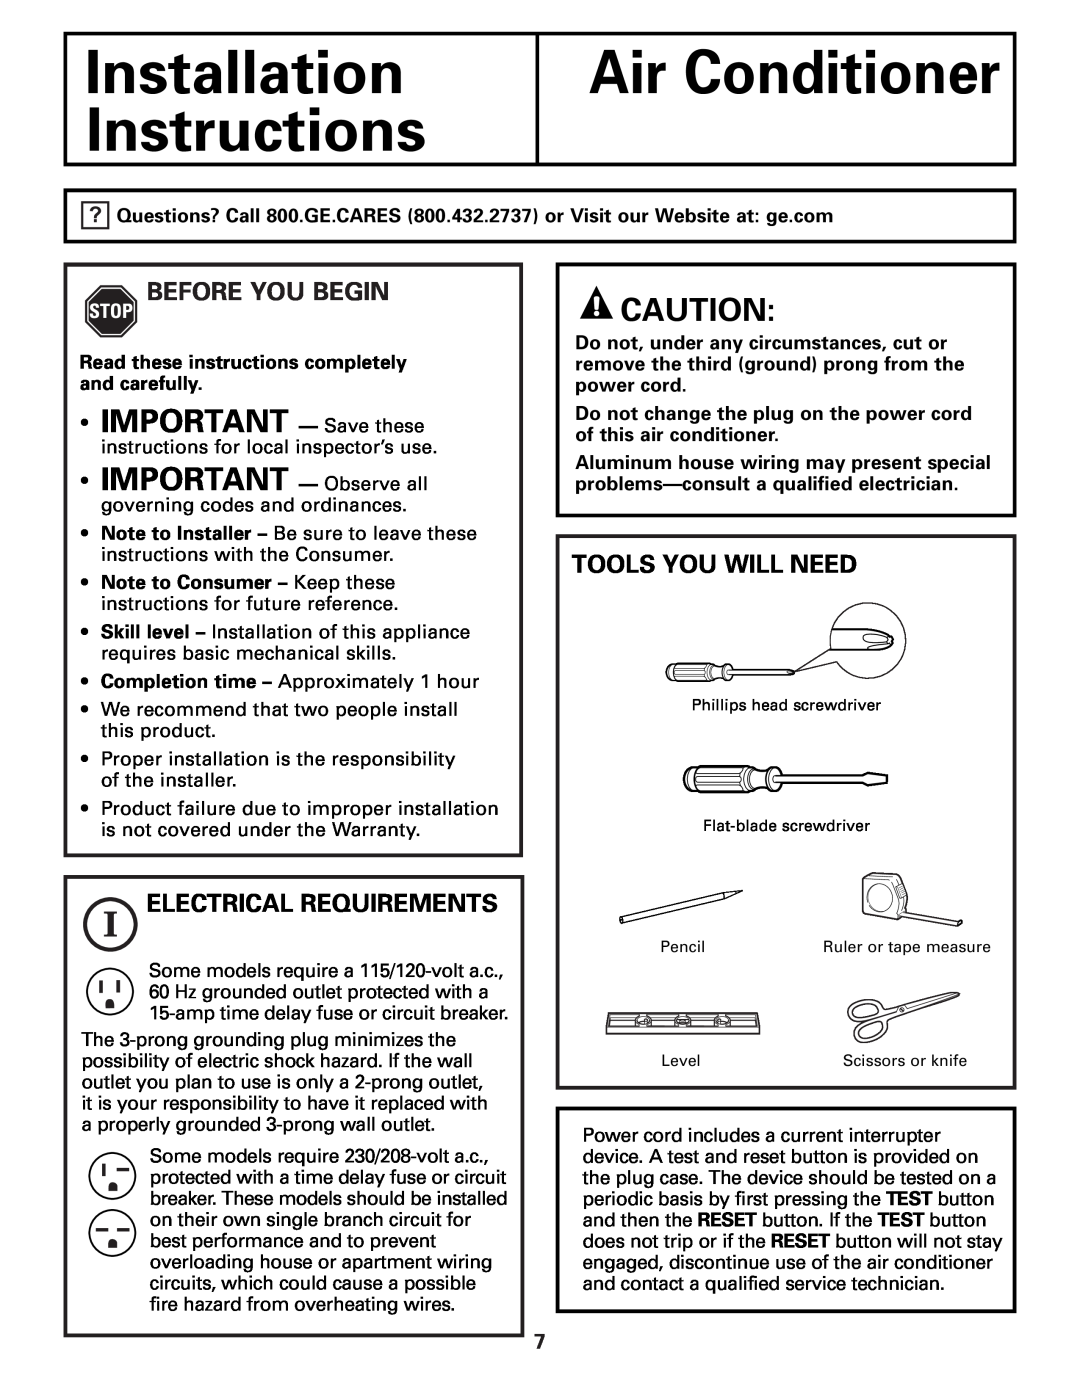 GE AGP07 Installation Instructions, Air Conditioner, •IMPORTANT — Save these, Before You Begin, Electrical Requirements 